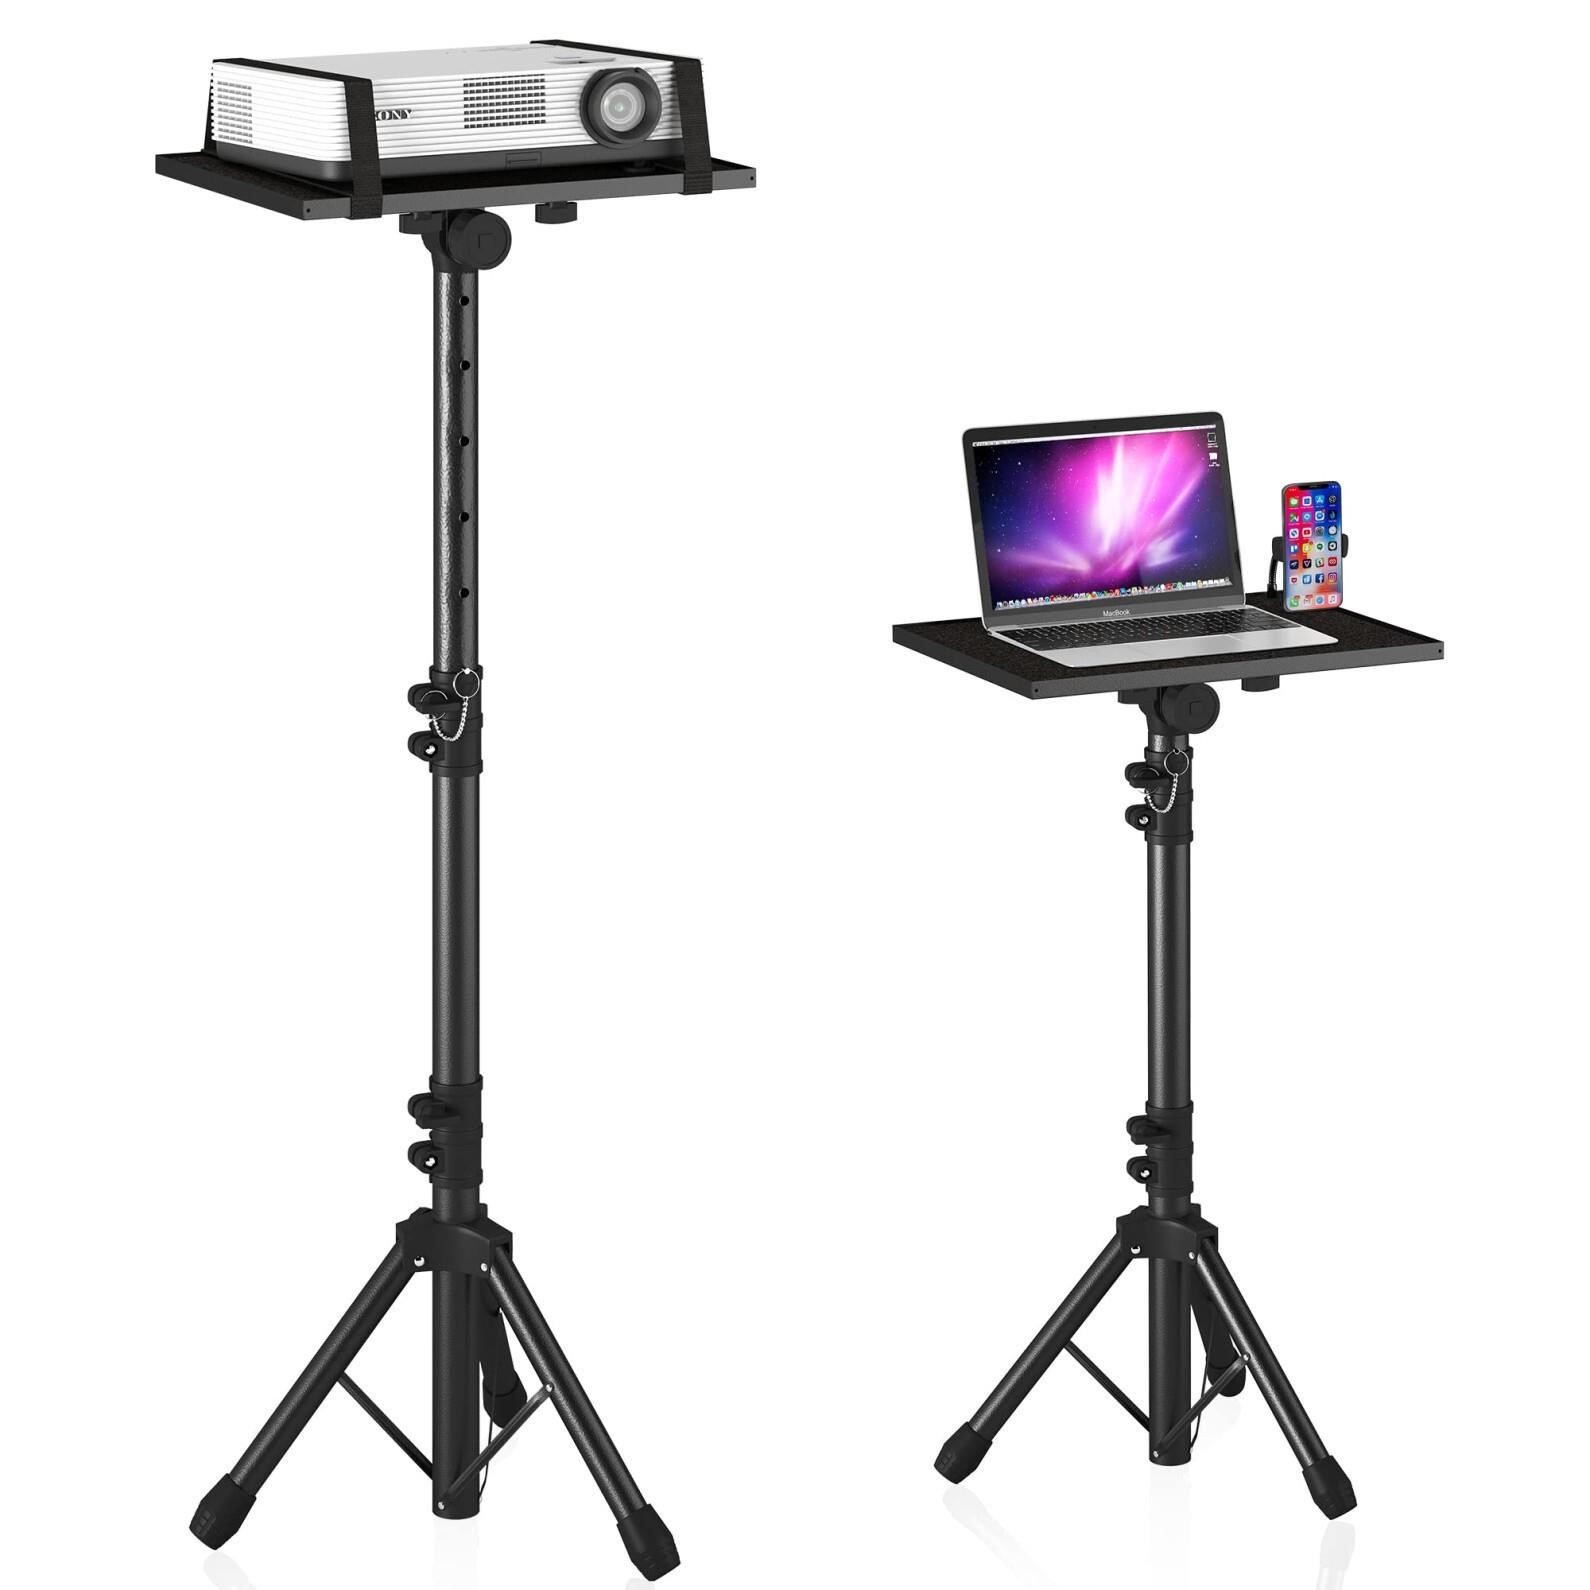 DECOSIS Projector Stand Tripod from 23" to 46", La